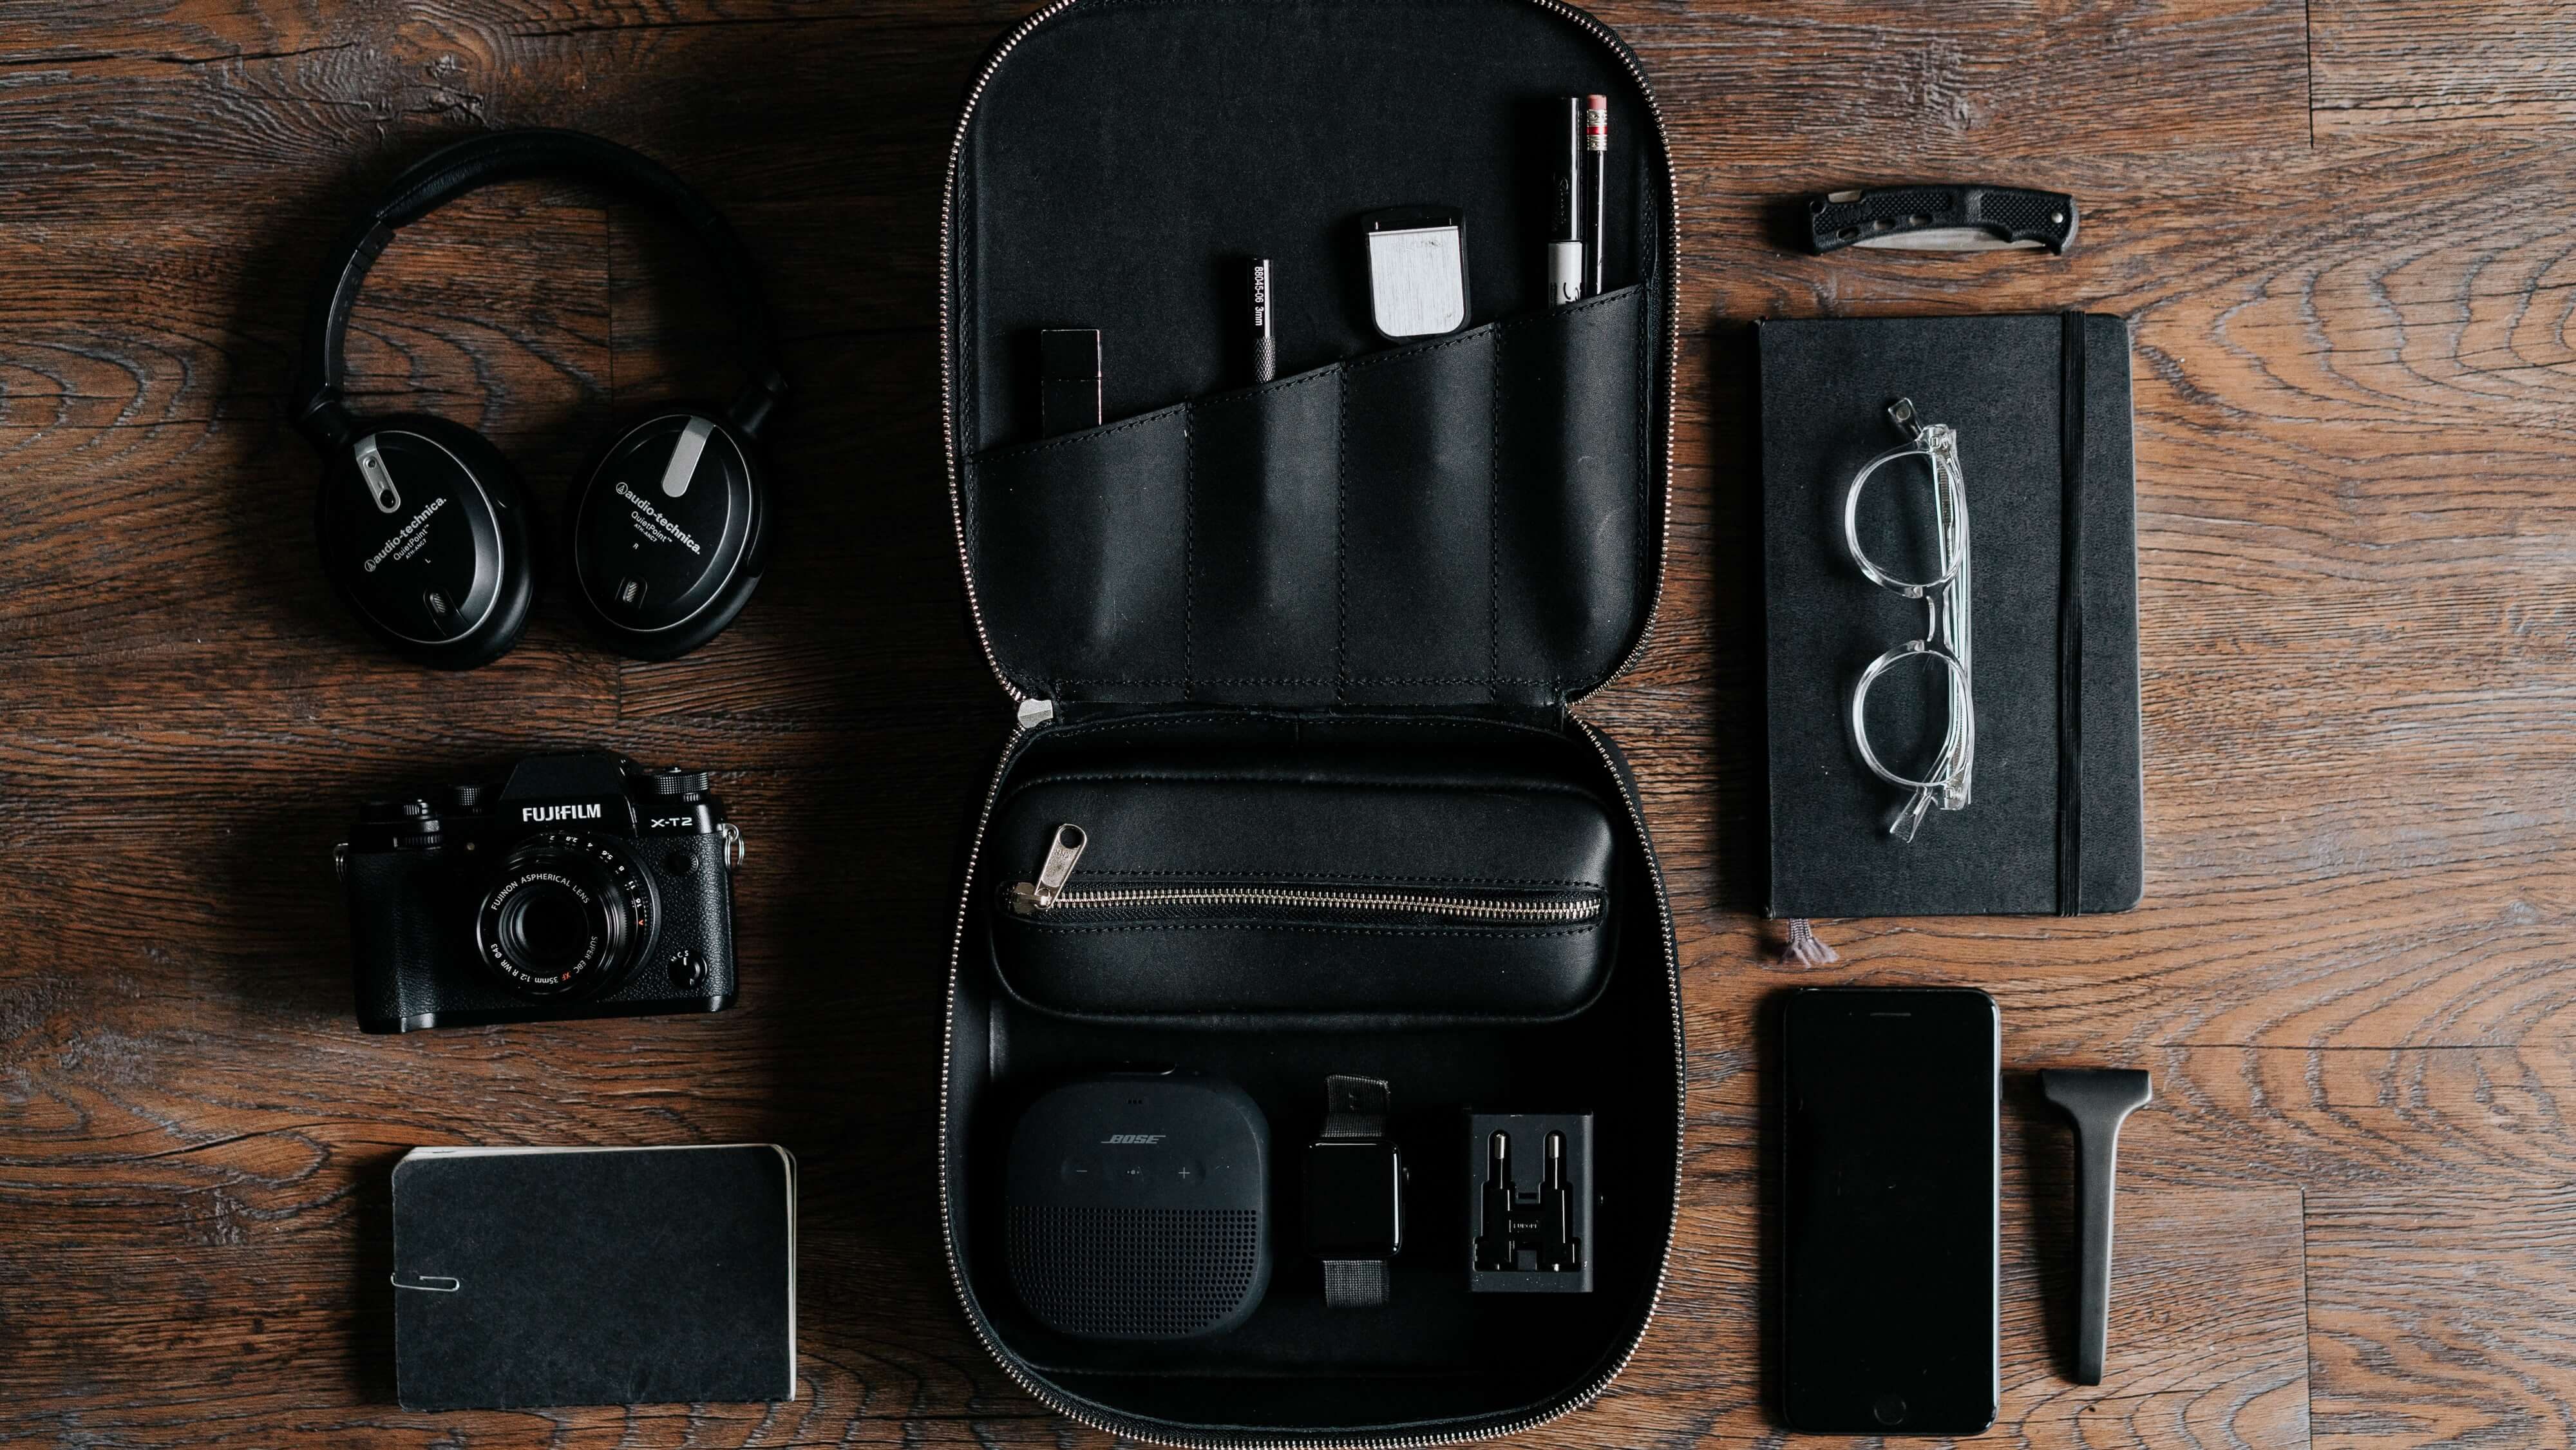 Swag travel kit that consists of the organizer, travel gadgets, notebooks and headphones 